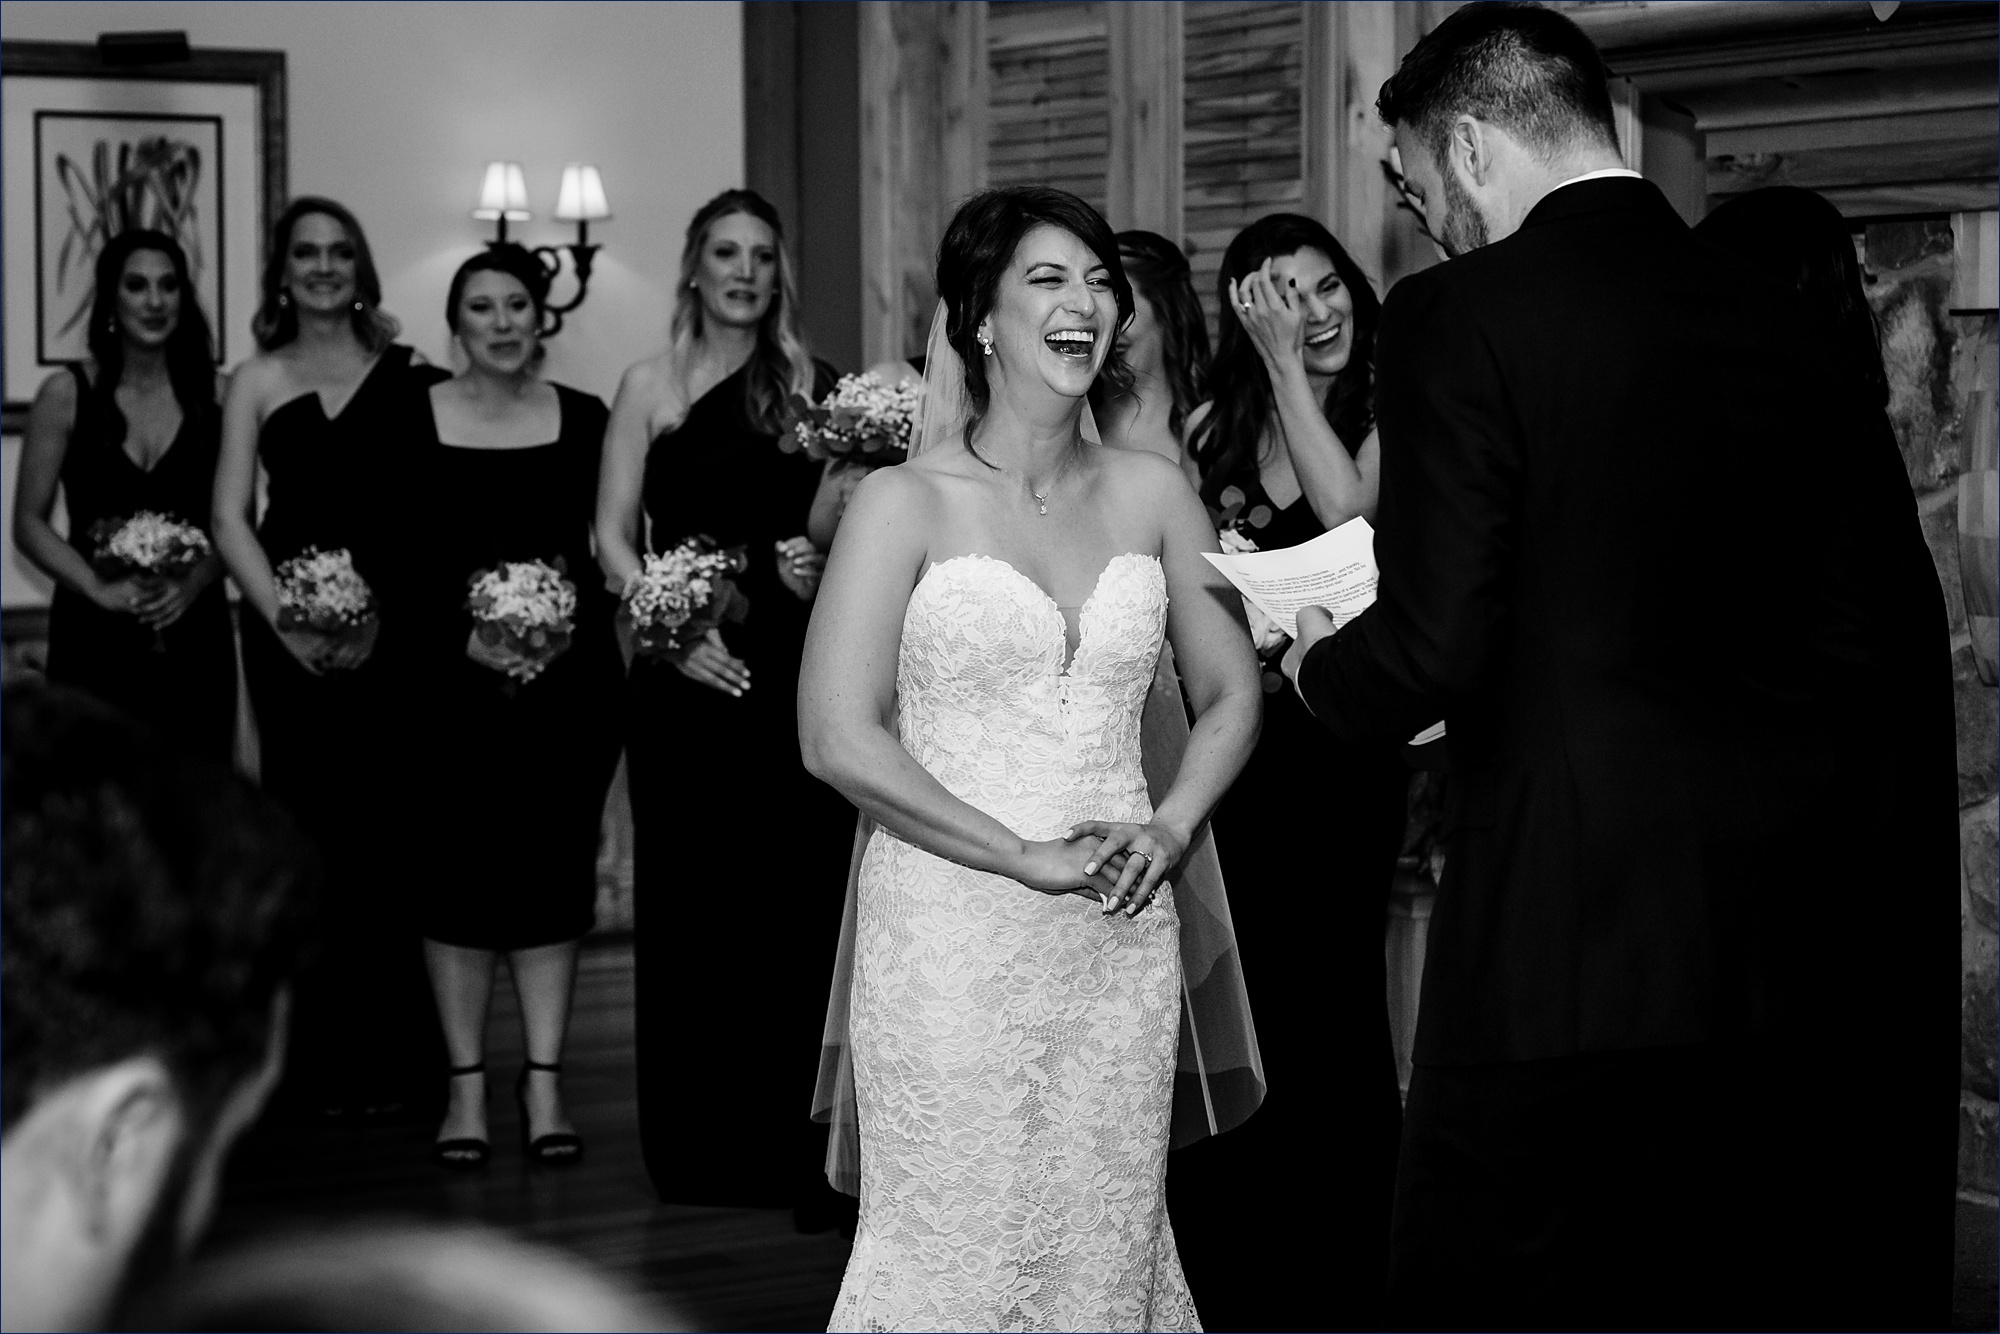 The bride laughs during the wedding ceremony in front of loved ones at their fall night wedding